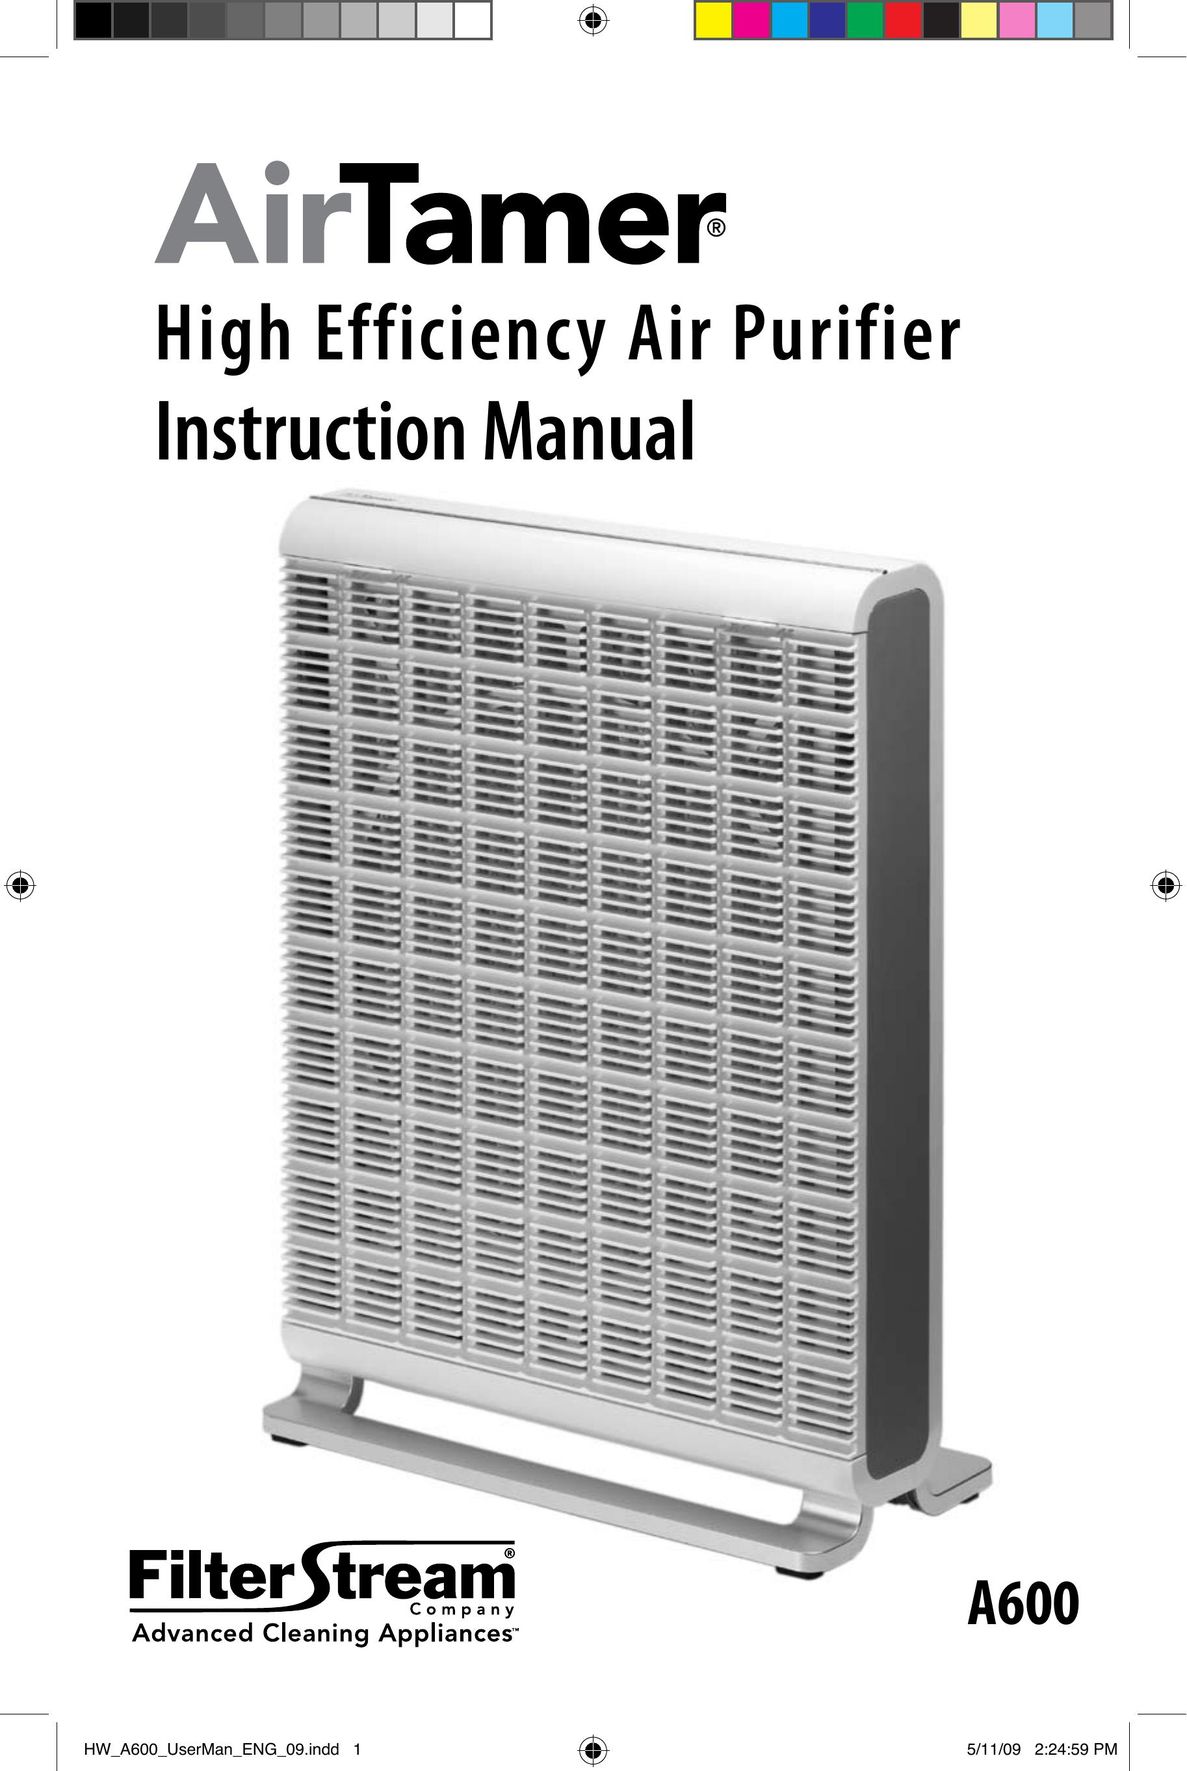 FilterStream A600 Air Cleaner User Manual